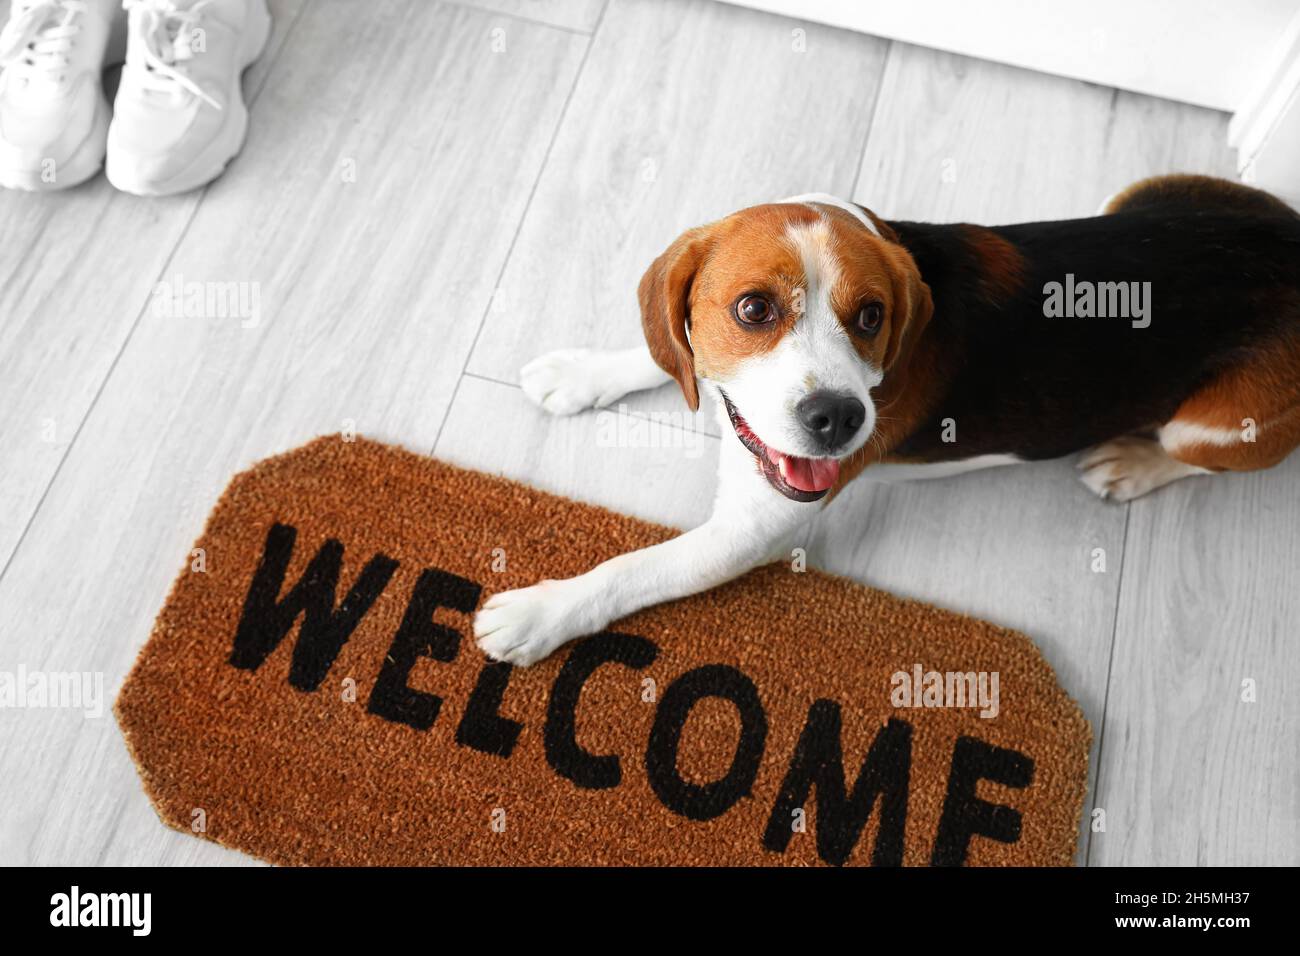 Small Puppy Dog Sitting On A Door Mat With Written Text Welcome Stock Photo  - Download Image Now - iStock